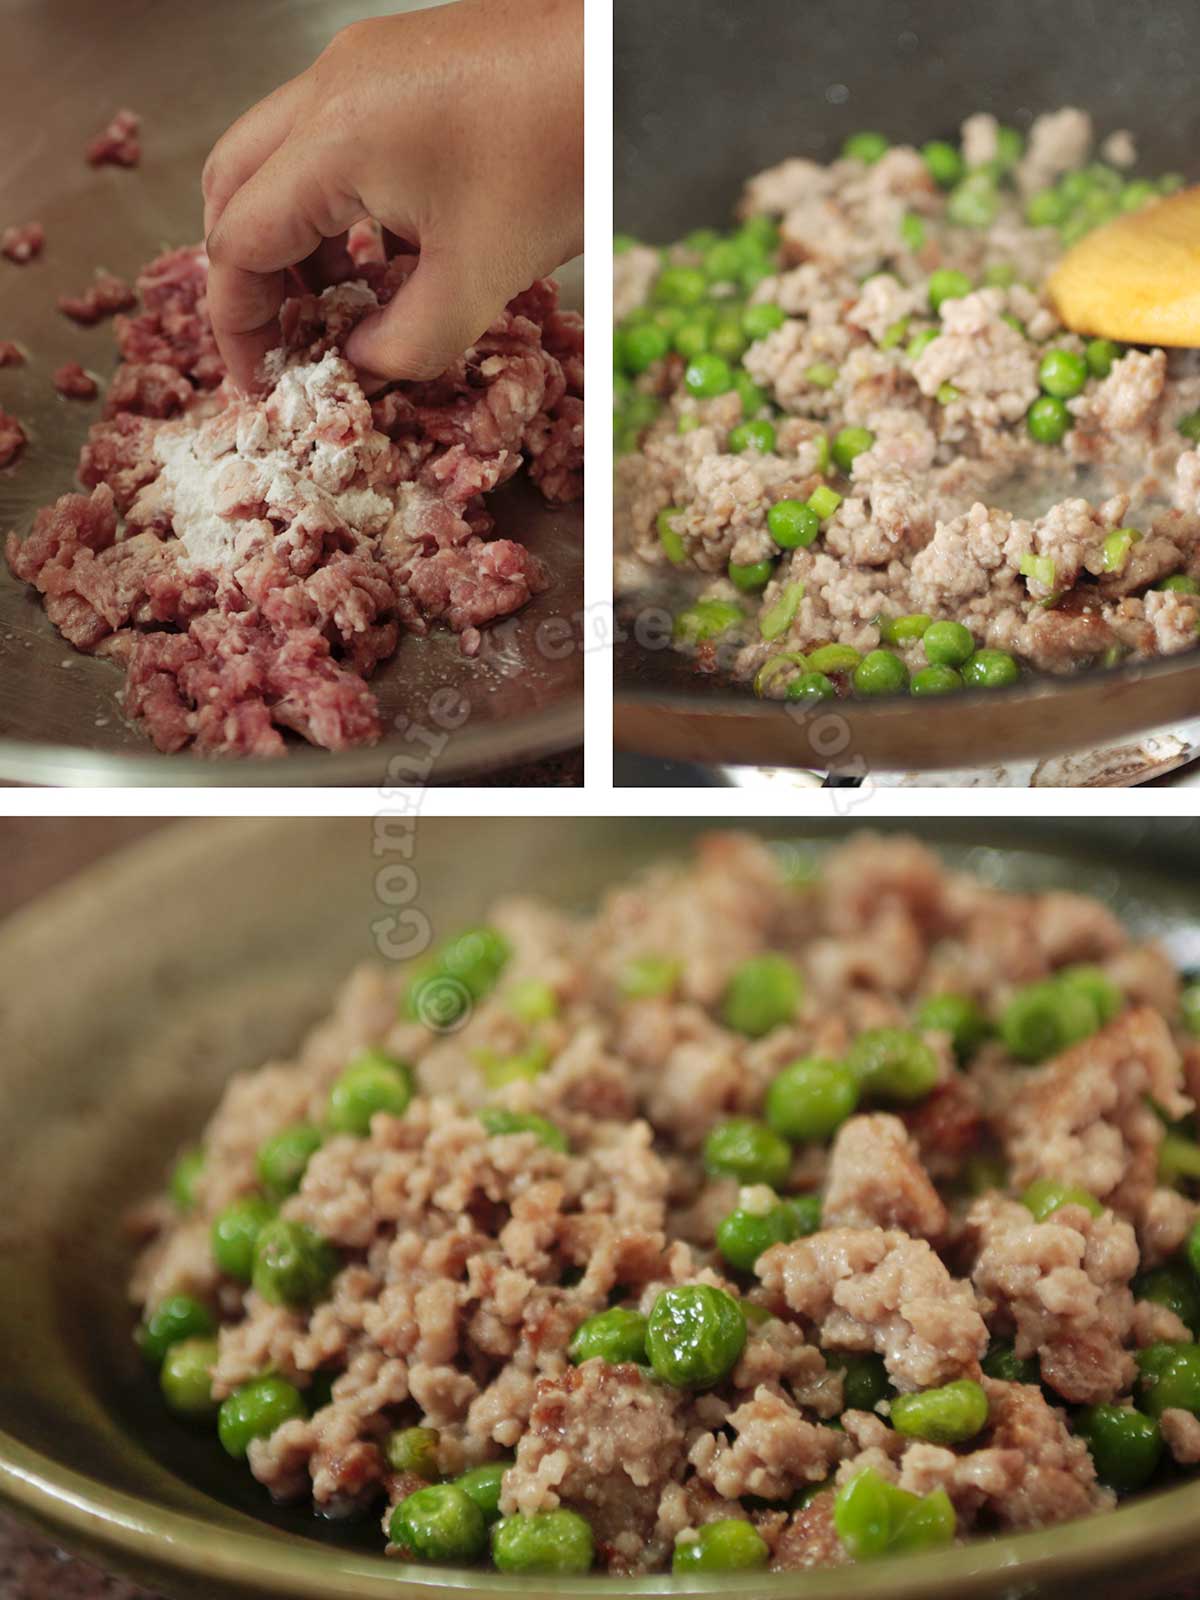 Cooking ground pork for taro puff filling